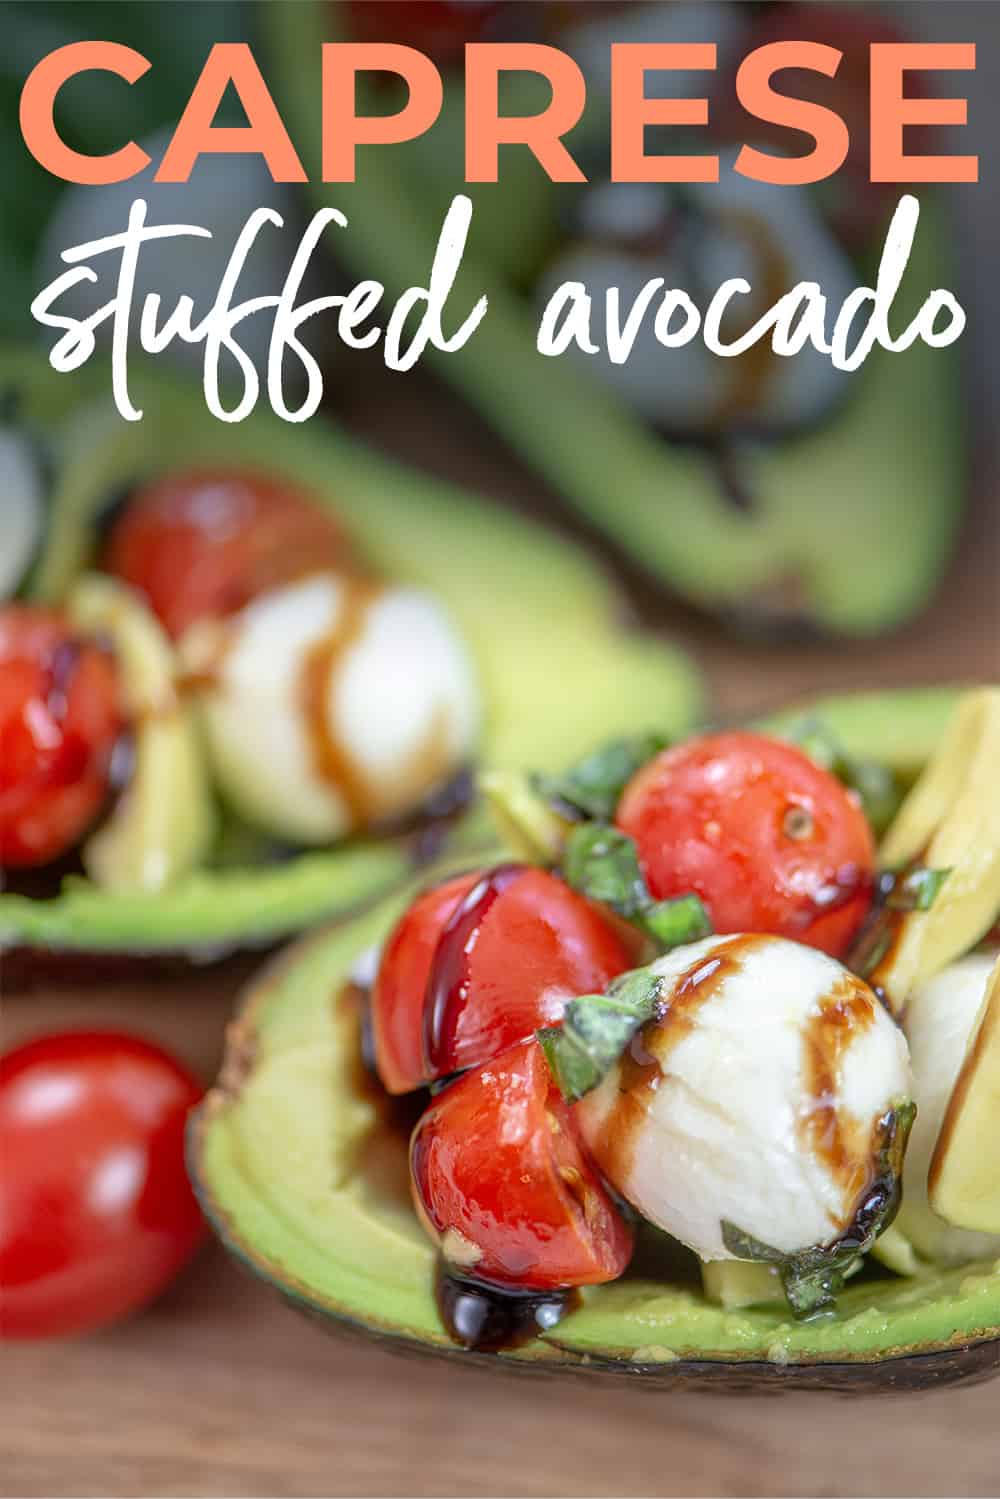 caprese stuffed avocado on board with text for pinterest.